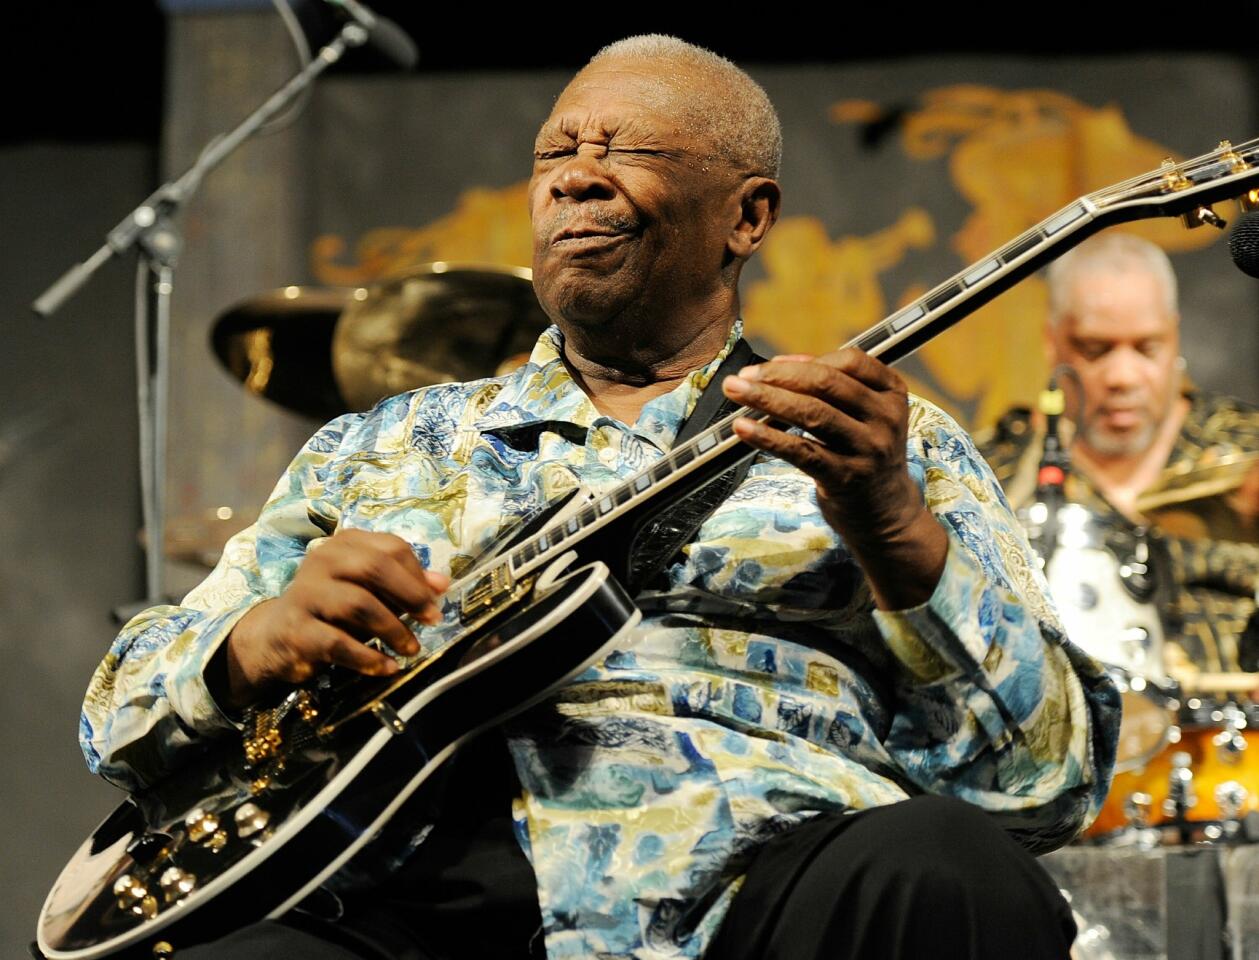 B.B. King, who passed away in 2015, performs at the 2010 New Orleans Jazz & Heritage Festival.